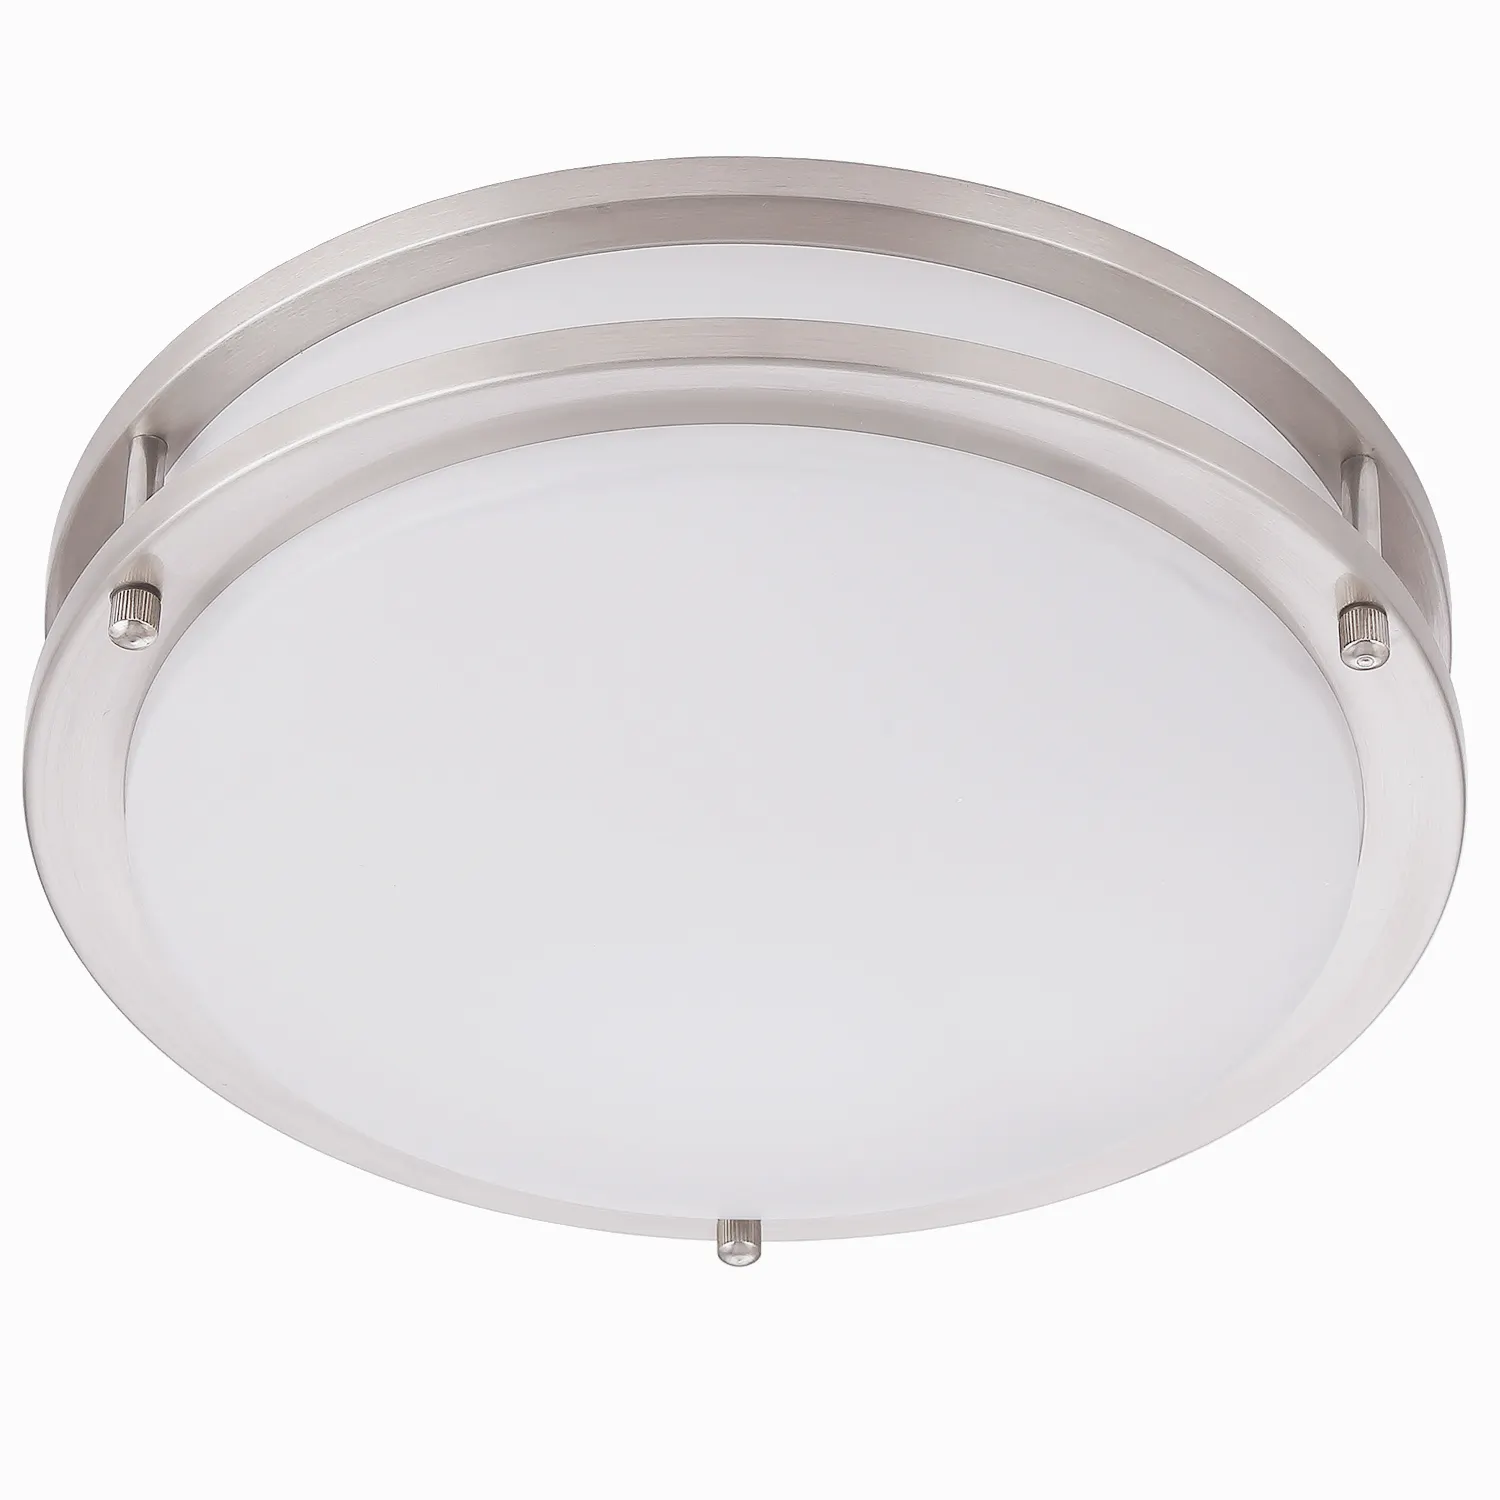 UL/ETL Listed 12 Inch White Acrylic Round LED Ceiling Light Fixtures 16w 1200lm 3000k Led Ceiling Lamp For Home